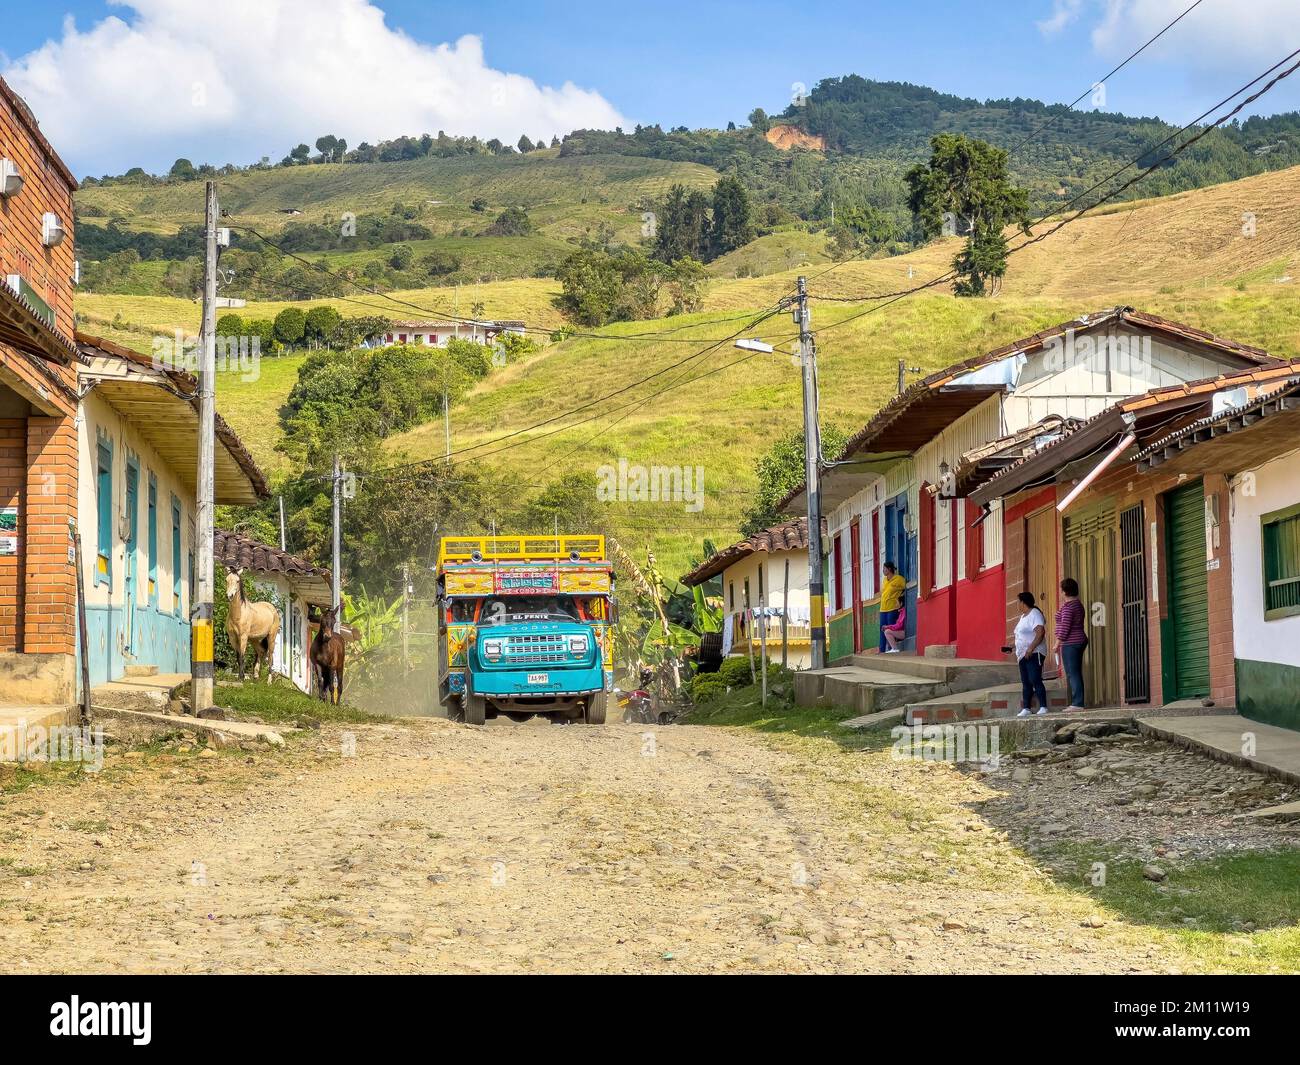 South America, Colombia, Departamento Antioquia, Colombian Andes, typical bus 'Chiva' on a dusty road in a small Andean village Stock Photo